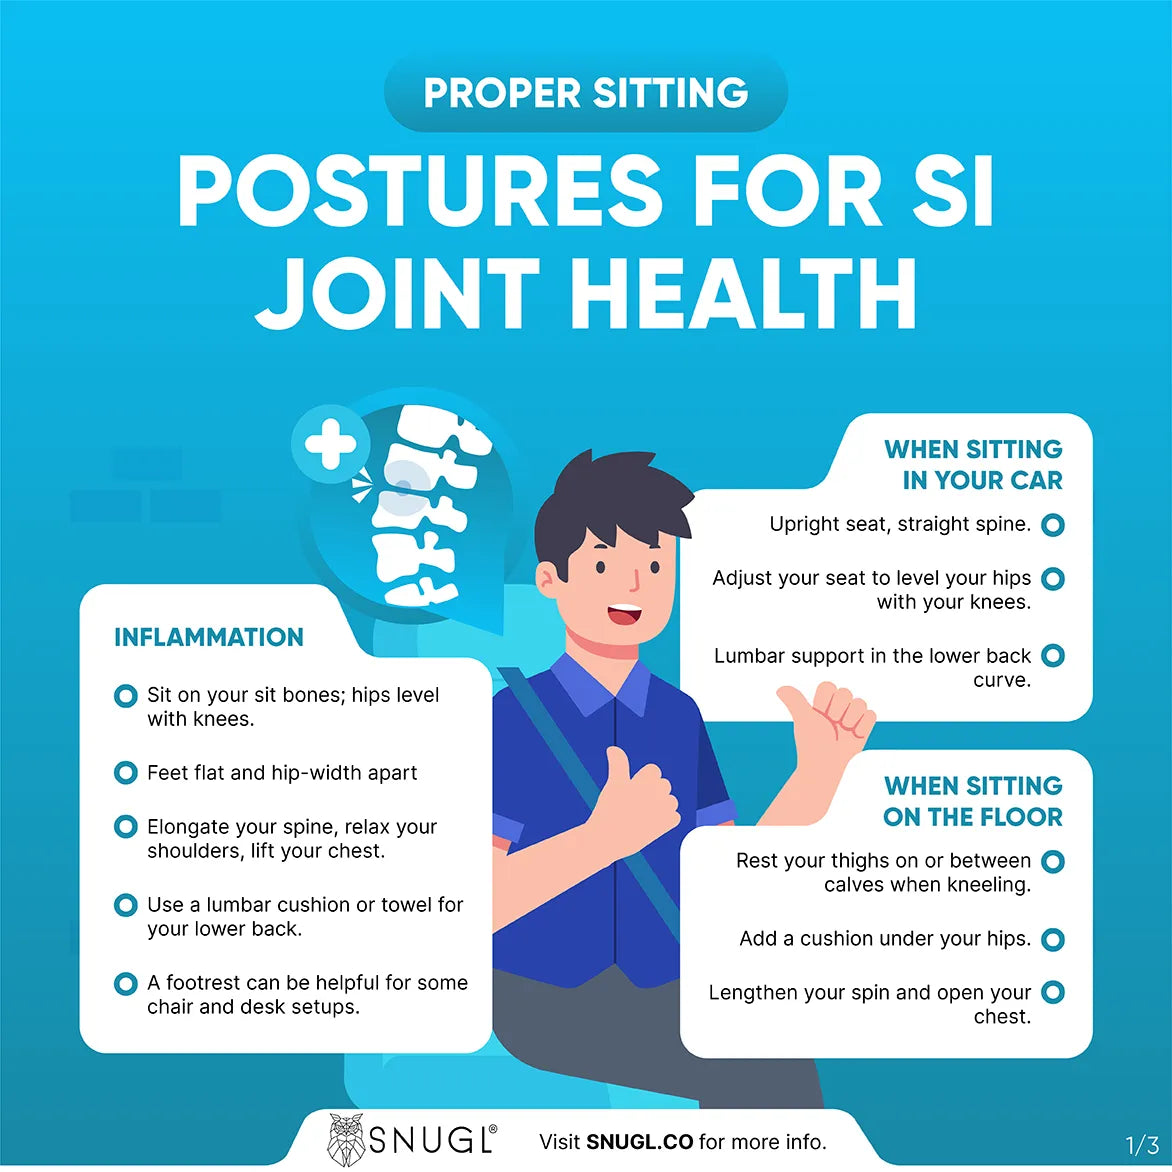 How To Sit Comfortably With SI Joint Pain